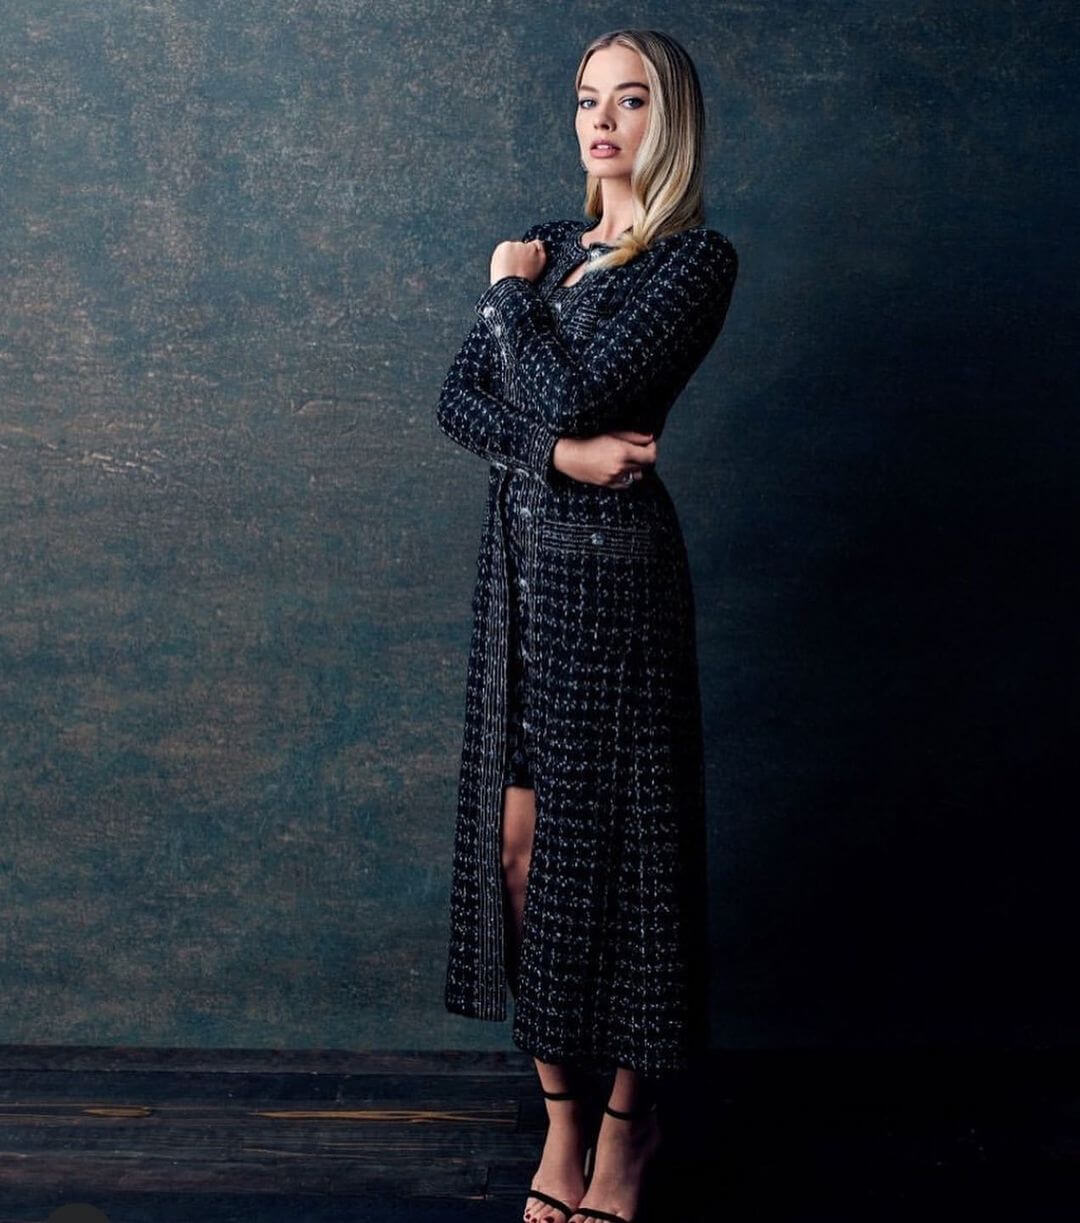 Gorgeous Margot Robbie In Black And White Chanel Dress And Longline Coat